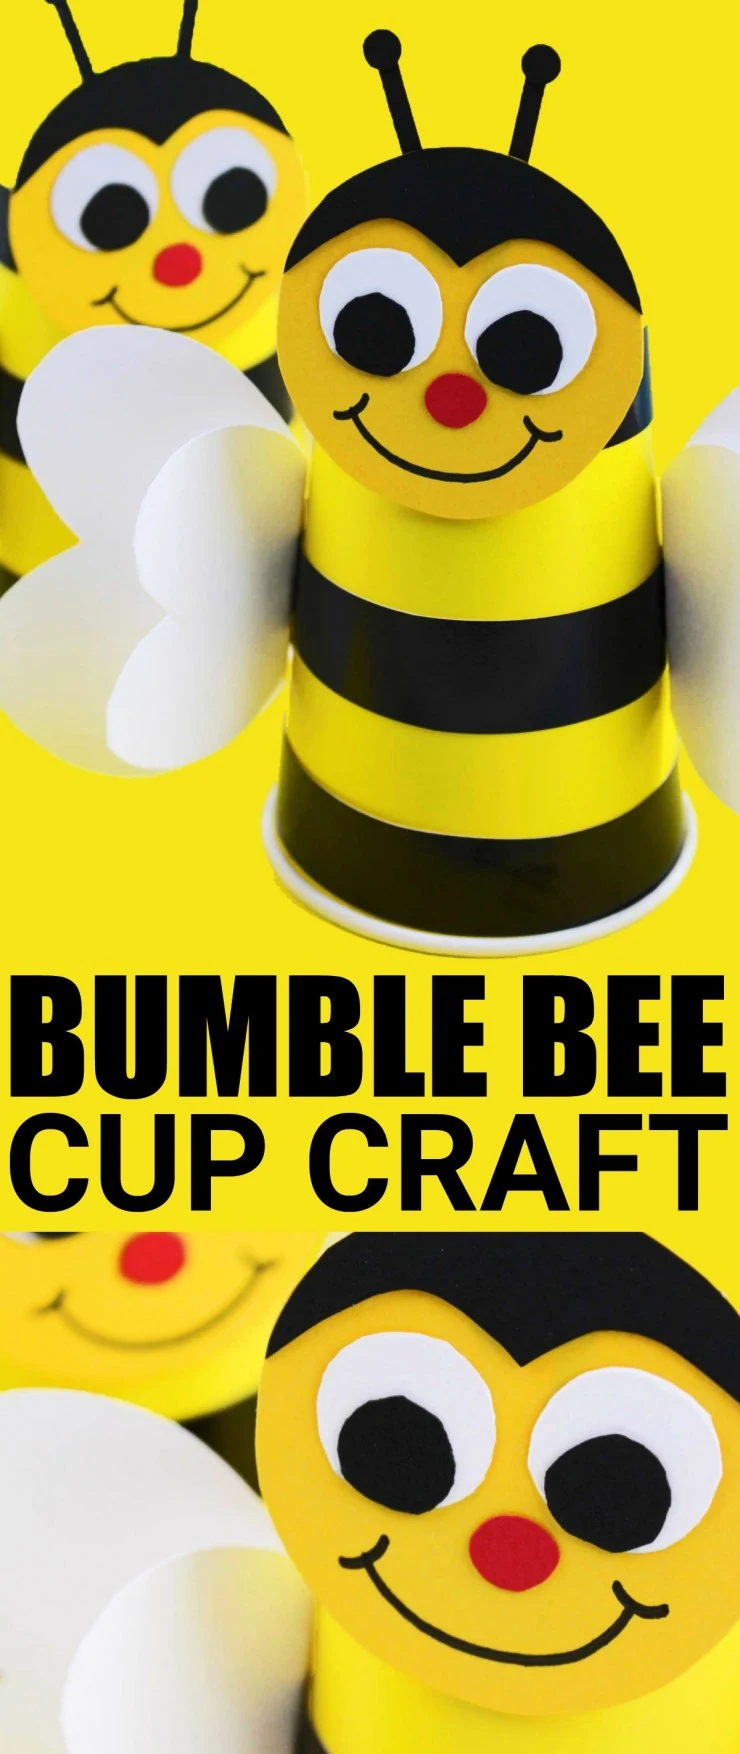 This Bumble Bee Cup Craft makes a wonderful classroom craft project. It’s inexpensive and easy!